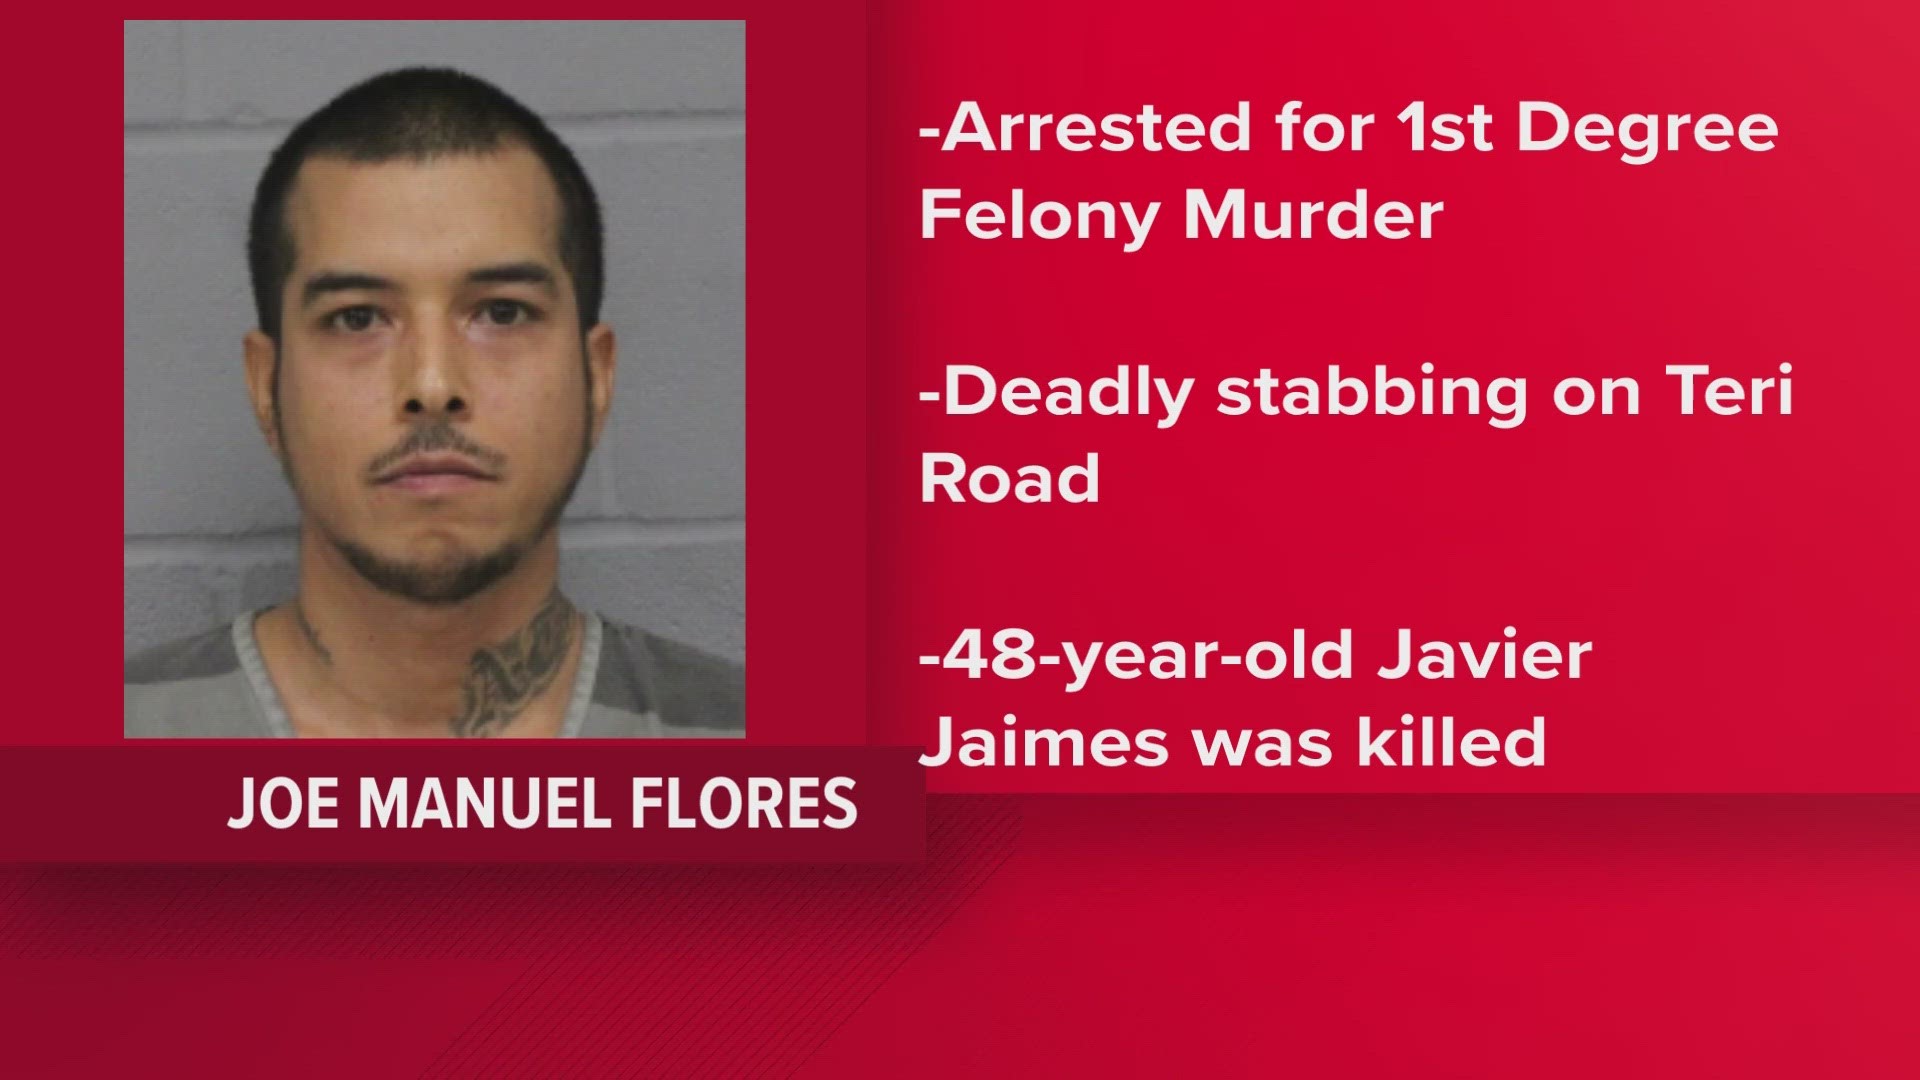 A man has been arrested in connection with a fatal stabbing in southeast Austin on Nov. 15.